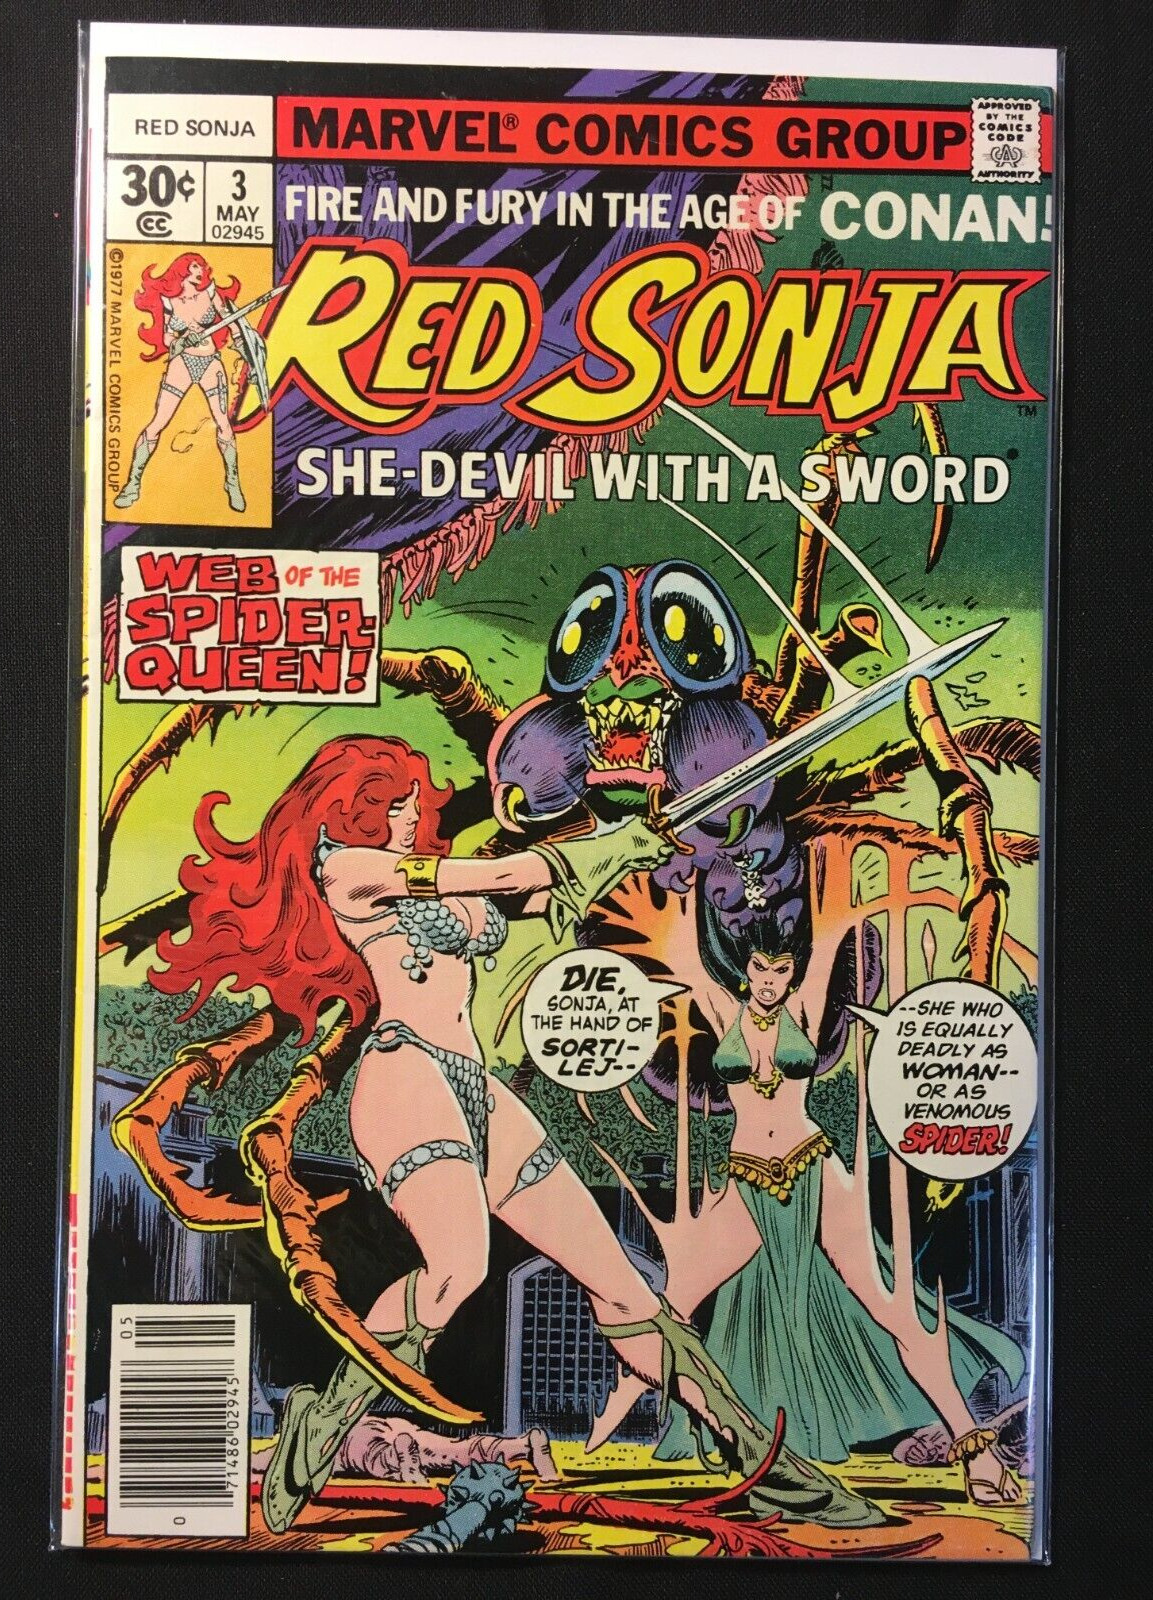 RED SONJA 3 FRANK THORNE WEB SPIDER QUEEN VOL 1 MARVEL BRONZE HELL AGE OF CONAN